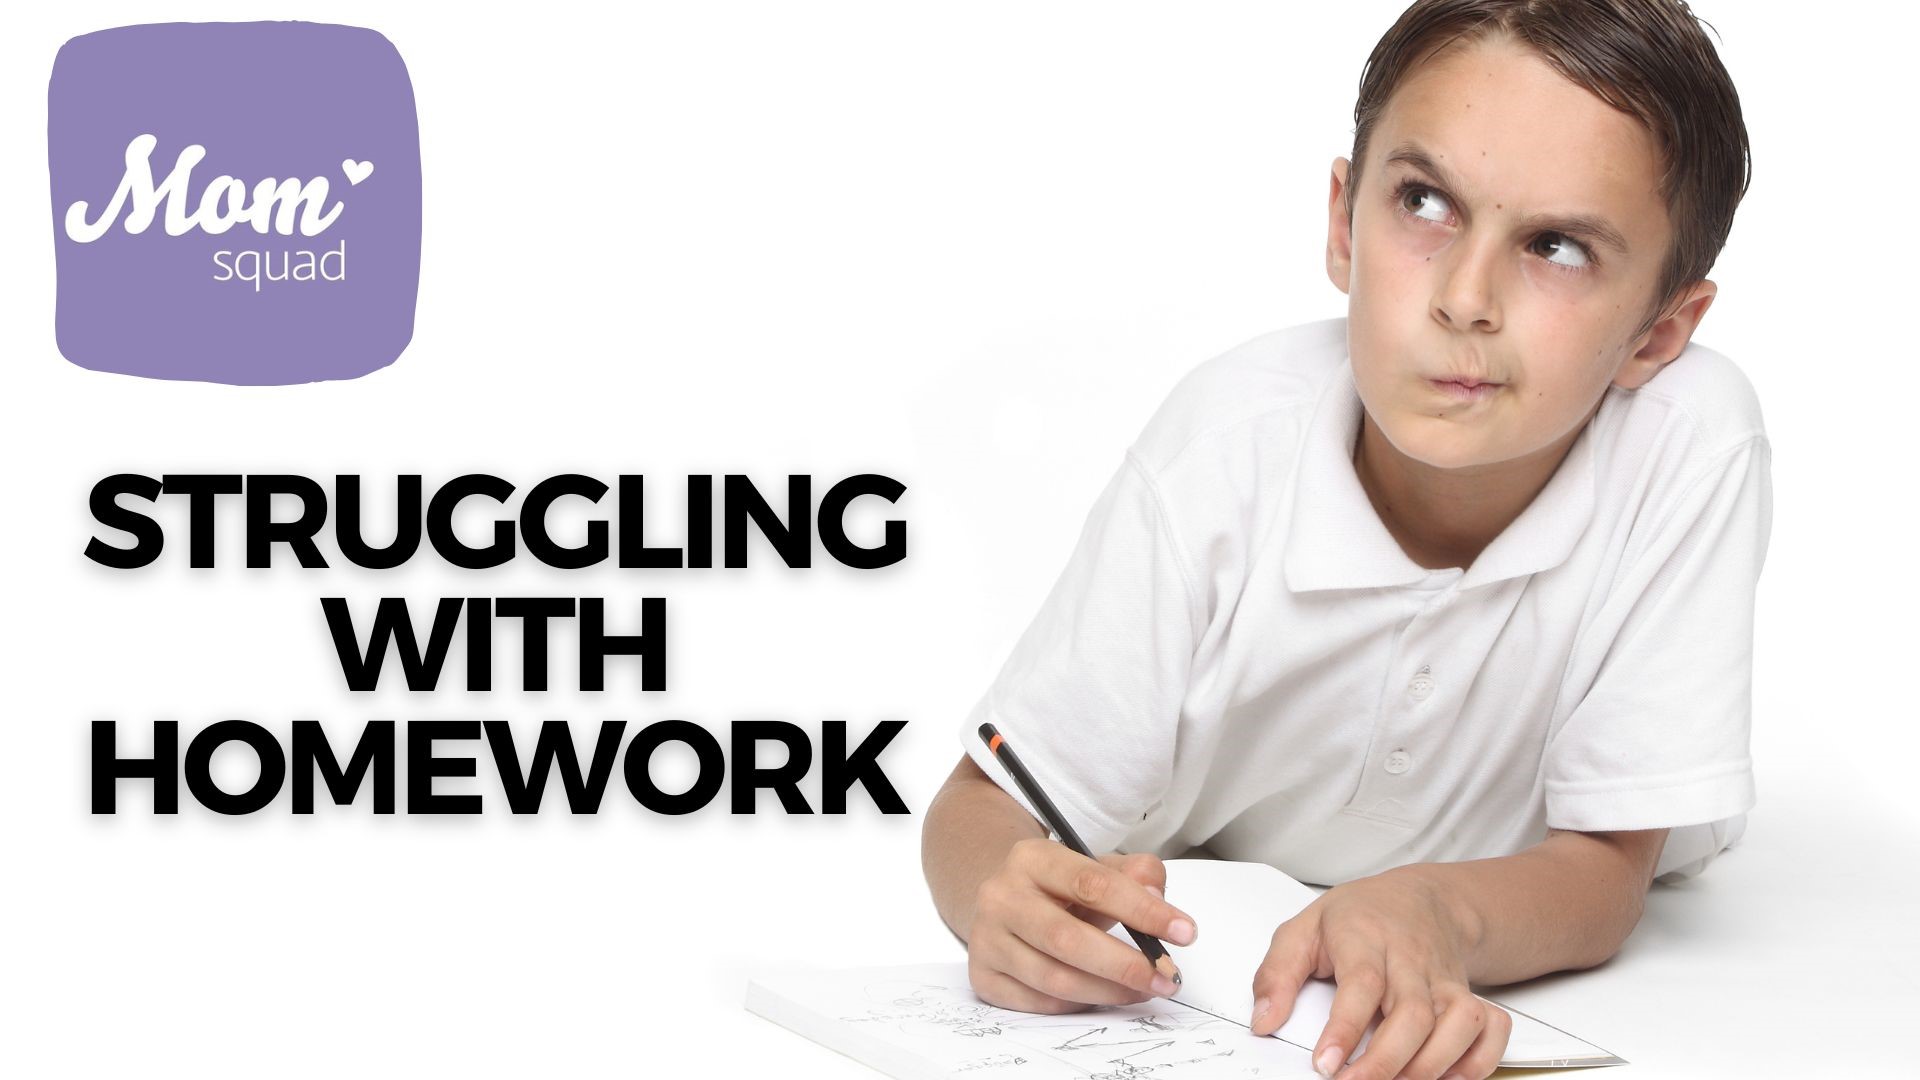 Maureen Kyle talks with a parenting educators about how to help your children with homework. From when to get extra help to how you can motivate them internally.